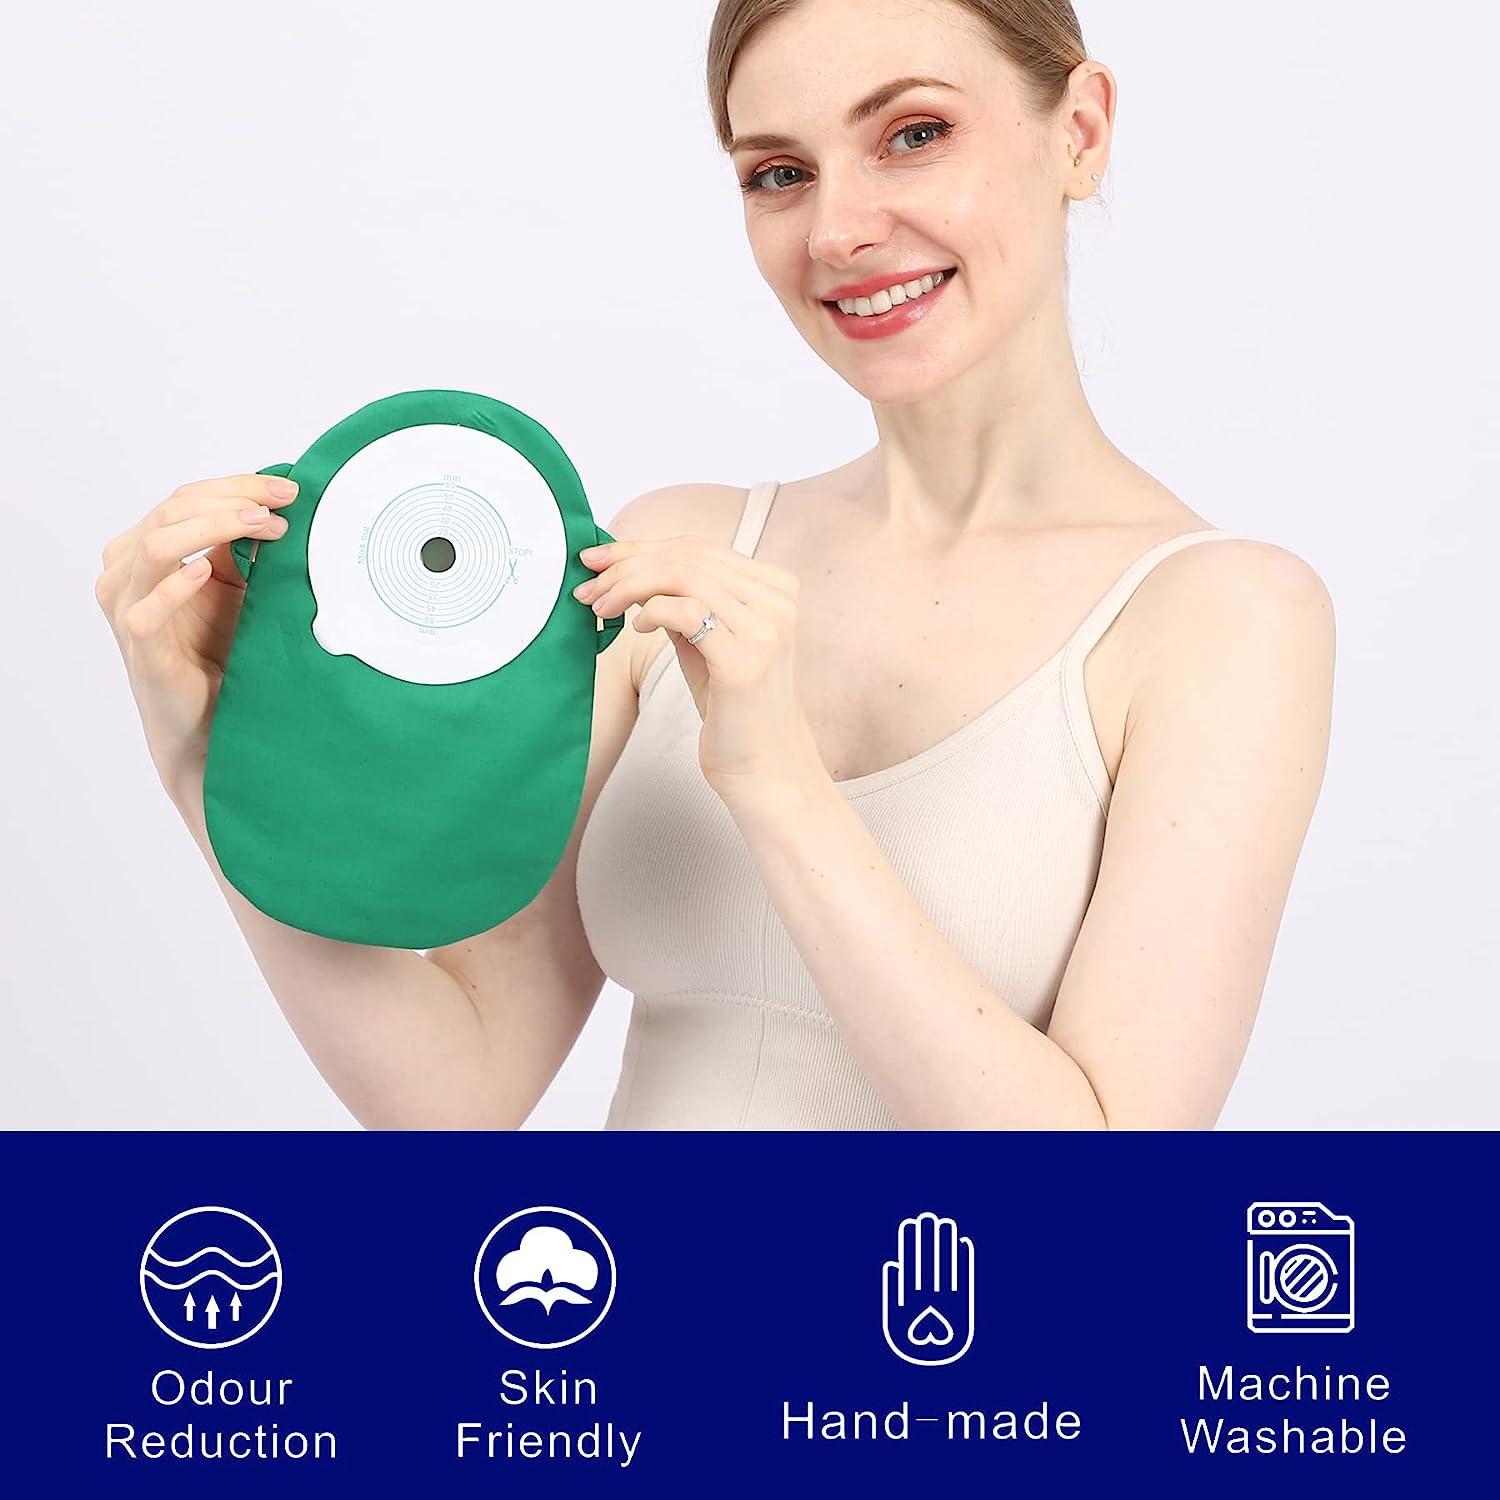 Ostomy Pouch Colostomy Bag Cover and Ostomy Bag Cover Belt Hoop Hook  Durable Ostomy Loop Closure Colostomy Bag Cover Washable Ostomy Pouch Covers